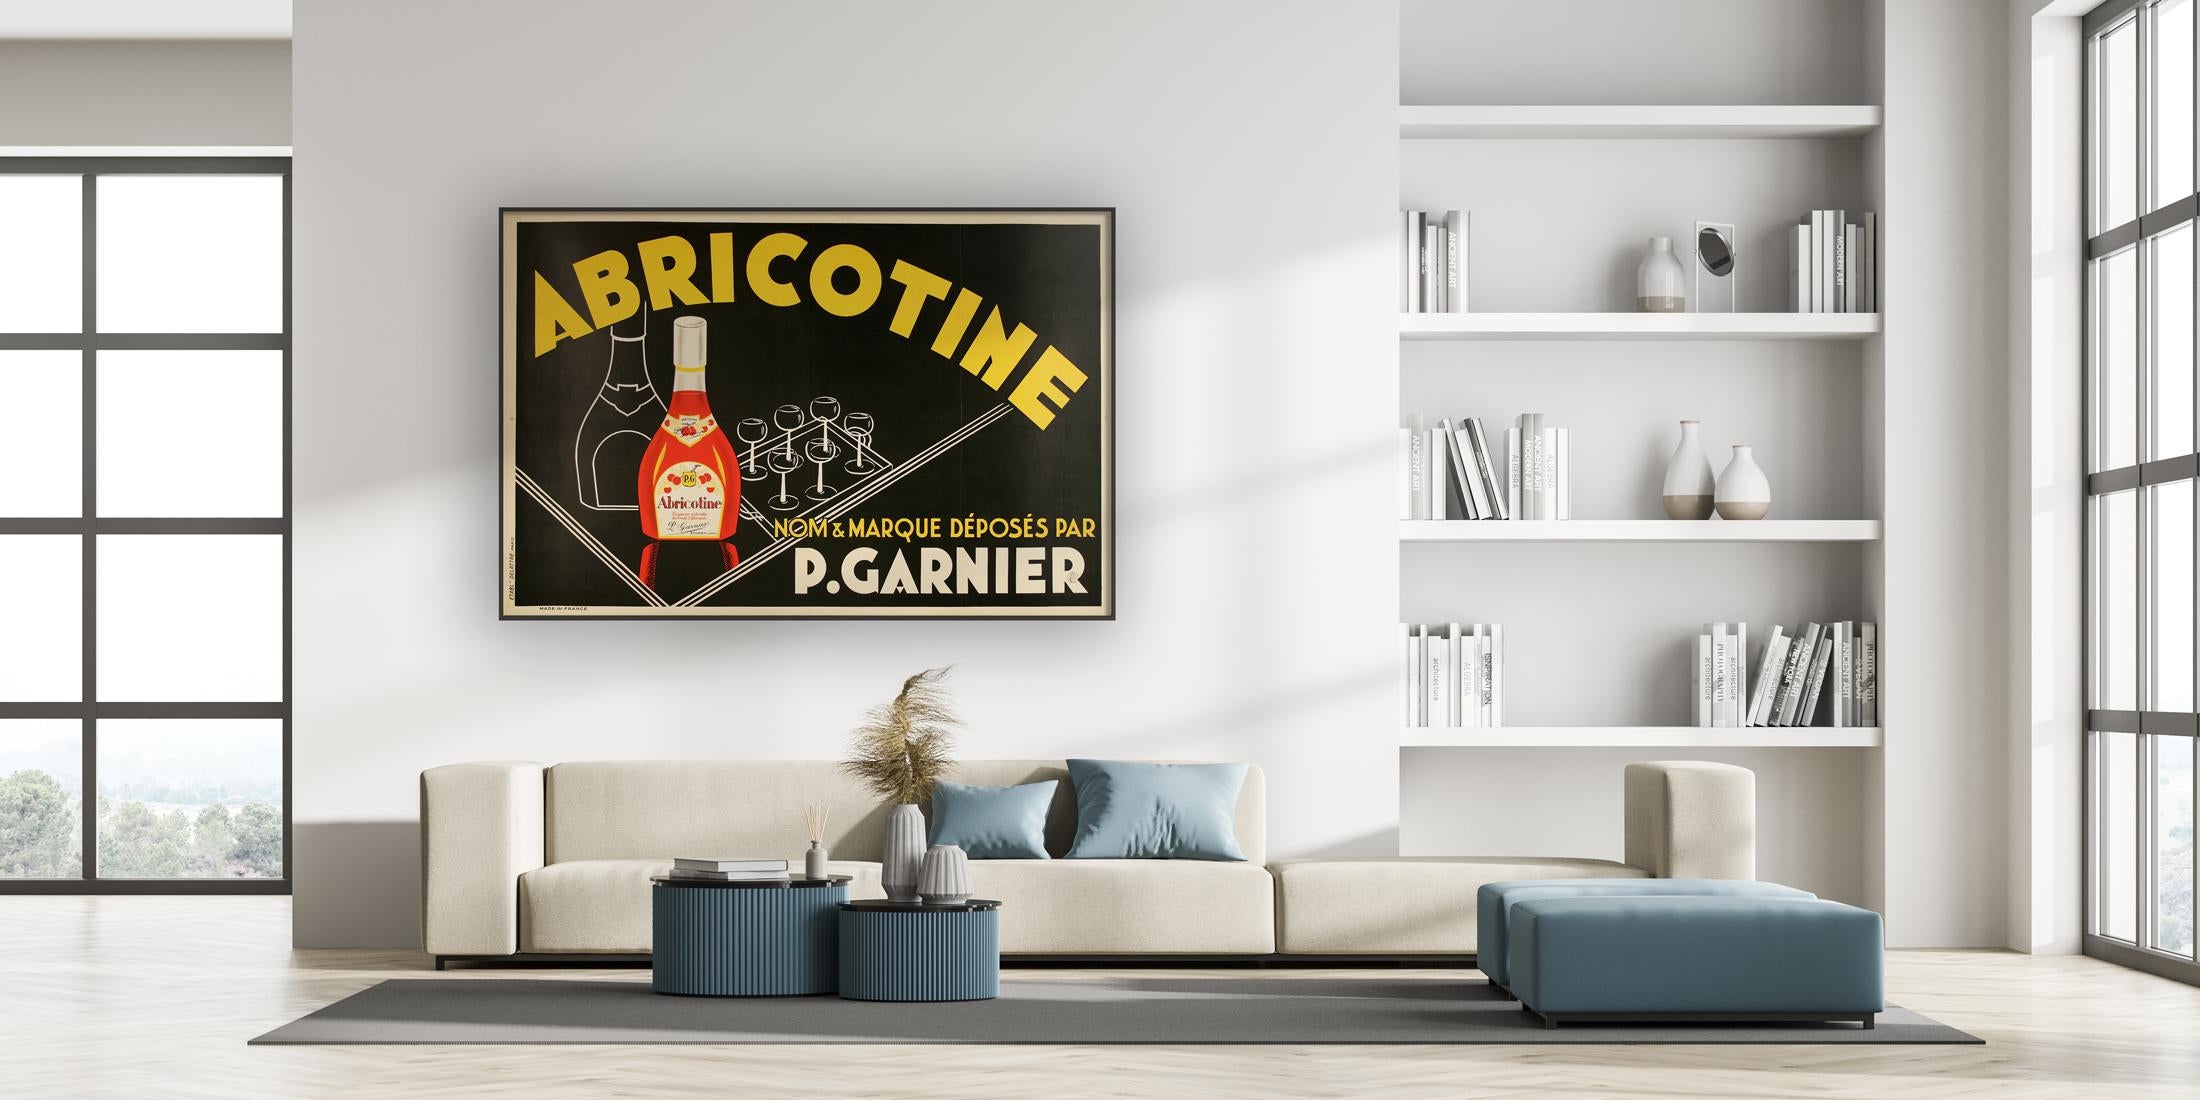 Fabulous large and impactful 1930s vintage French alcohol advertsing poster for Abricotine. Superb colors and styling.

Abricotine is a clear, colorless fruit brandy that is characterized by its dominant apricot and subtle almond flavour. It is